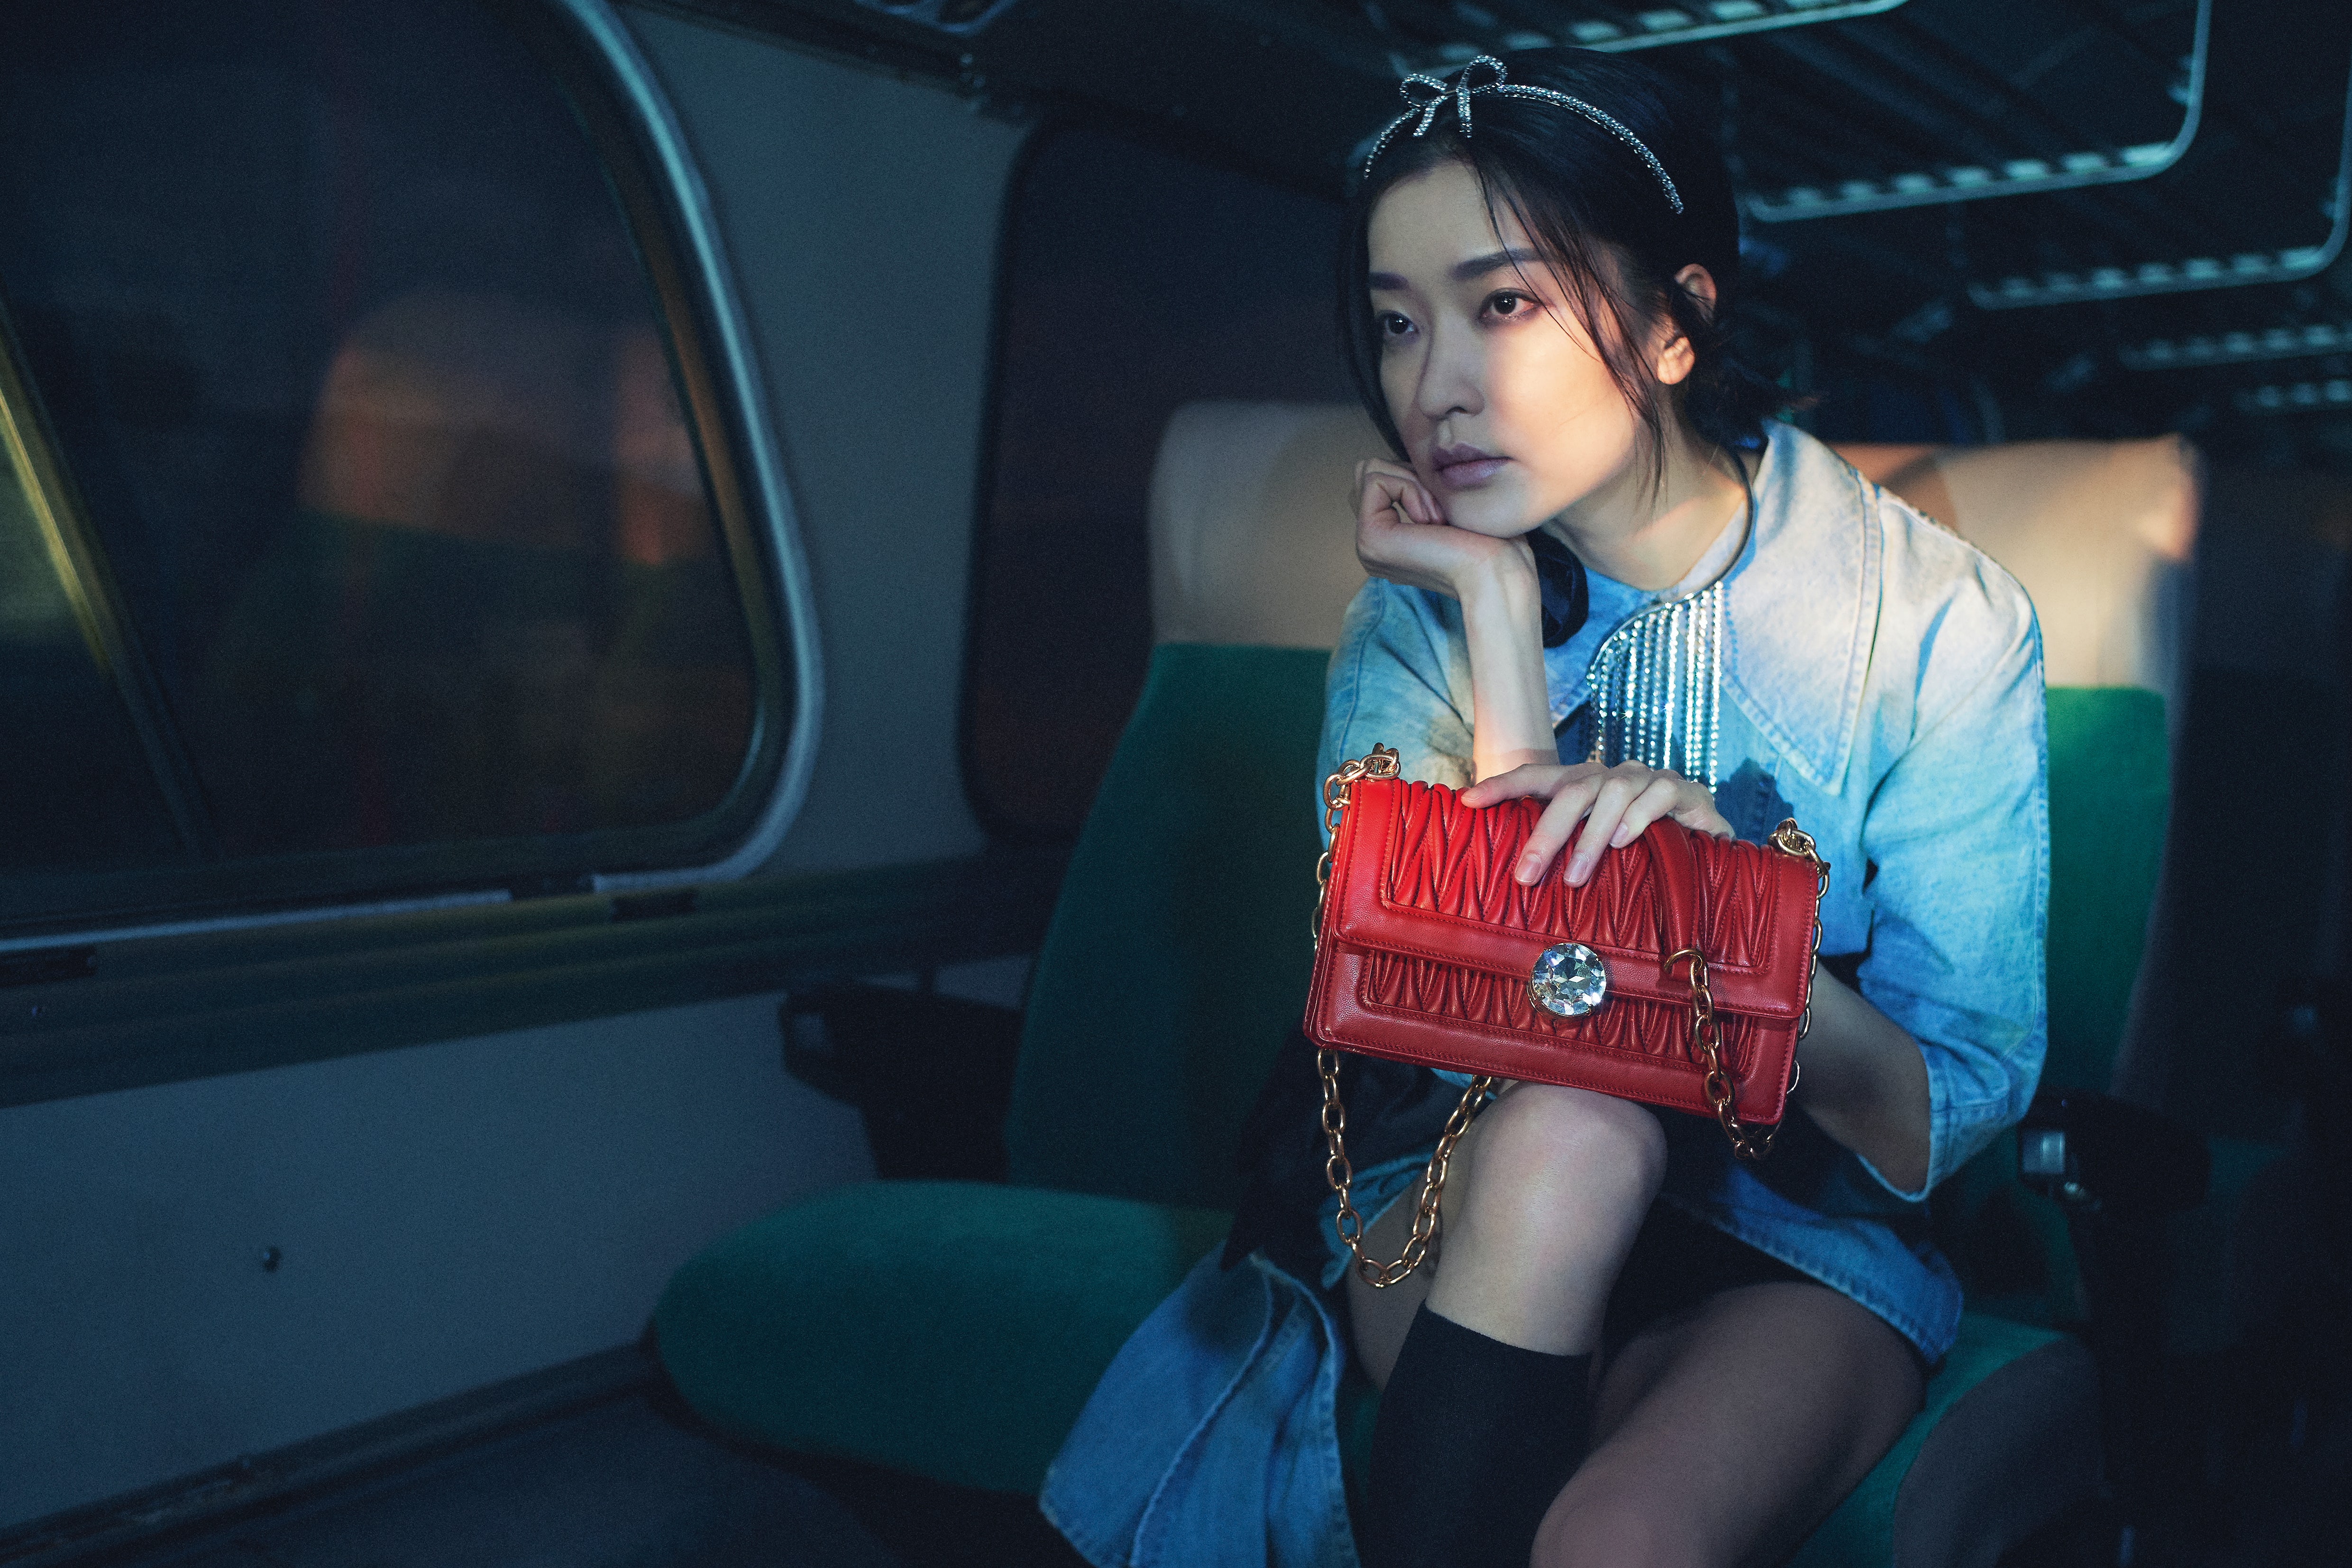 WeChat Gains on Tmall and JD.com in China Luxury Battle